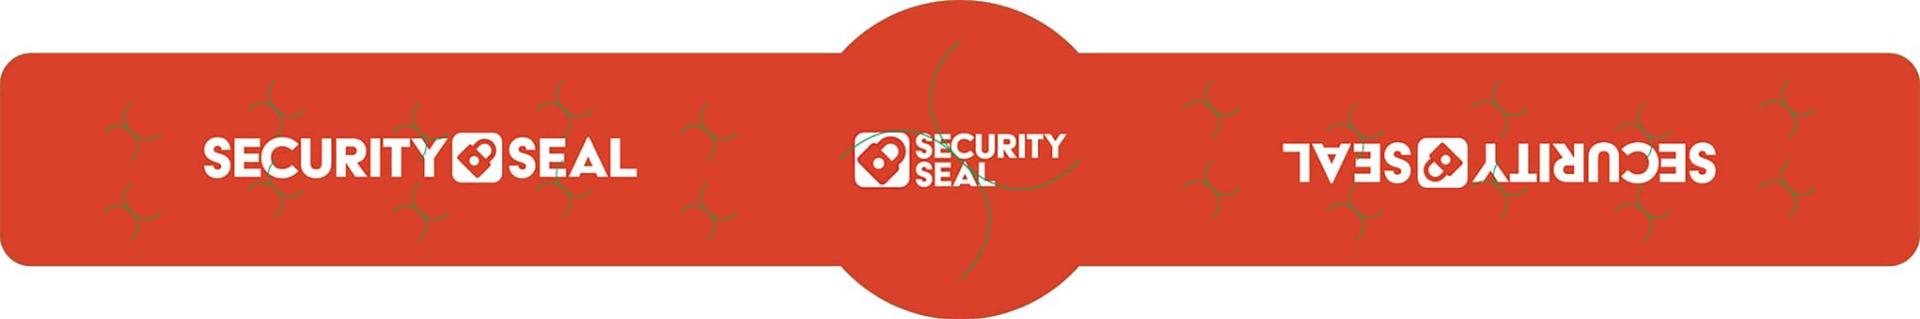 1.5X9-Security-Seal_REVISED